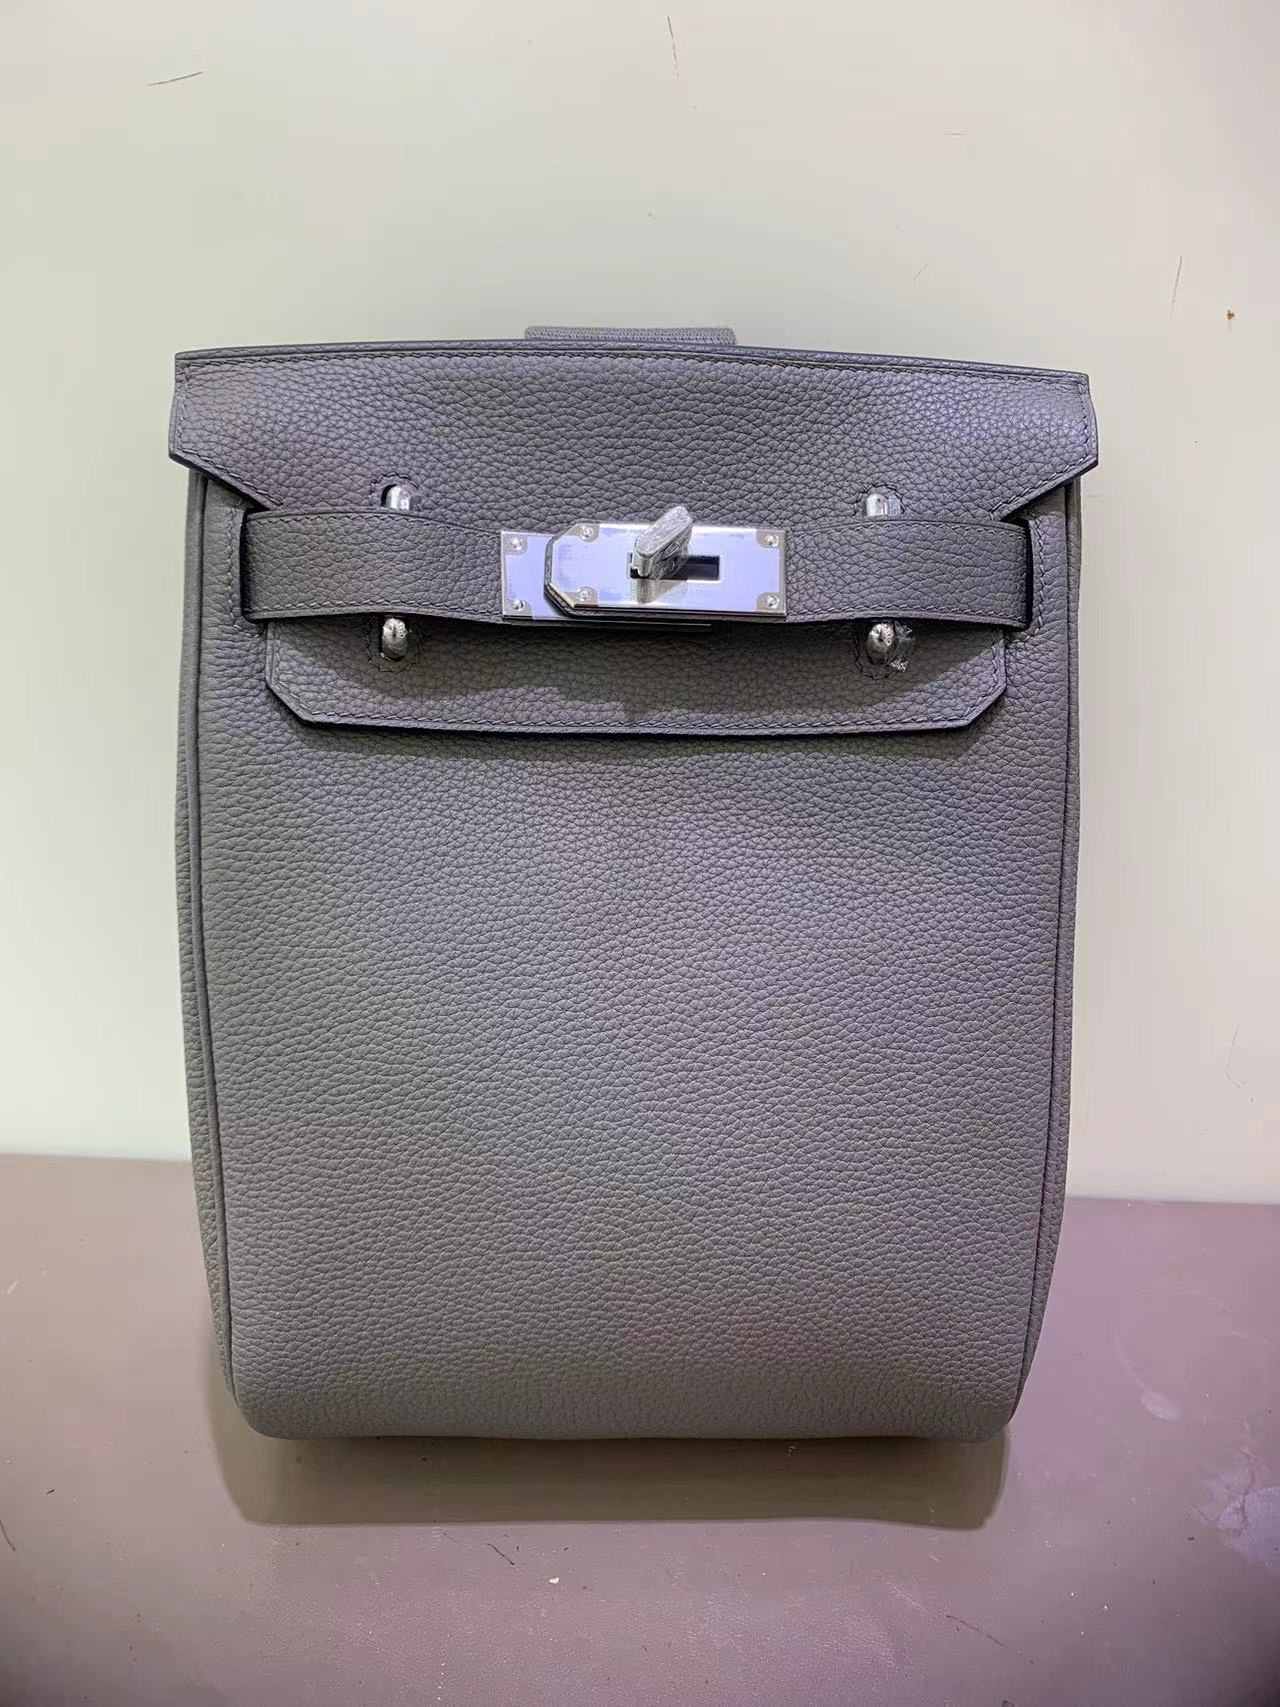 REAL 1:1 HAND-STITCHED HERMES HAC A DOS PM BACKPACK ETAIN PHW